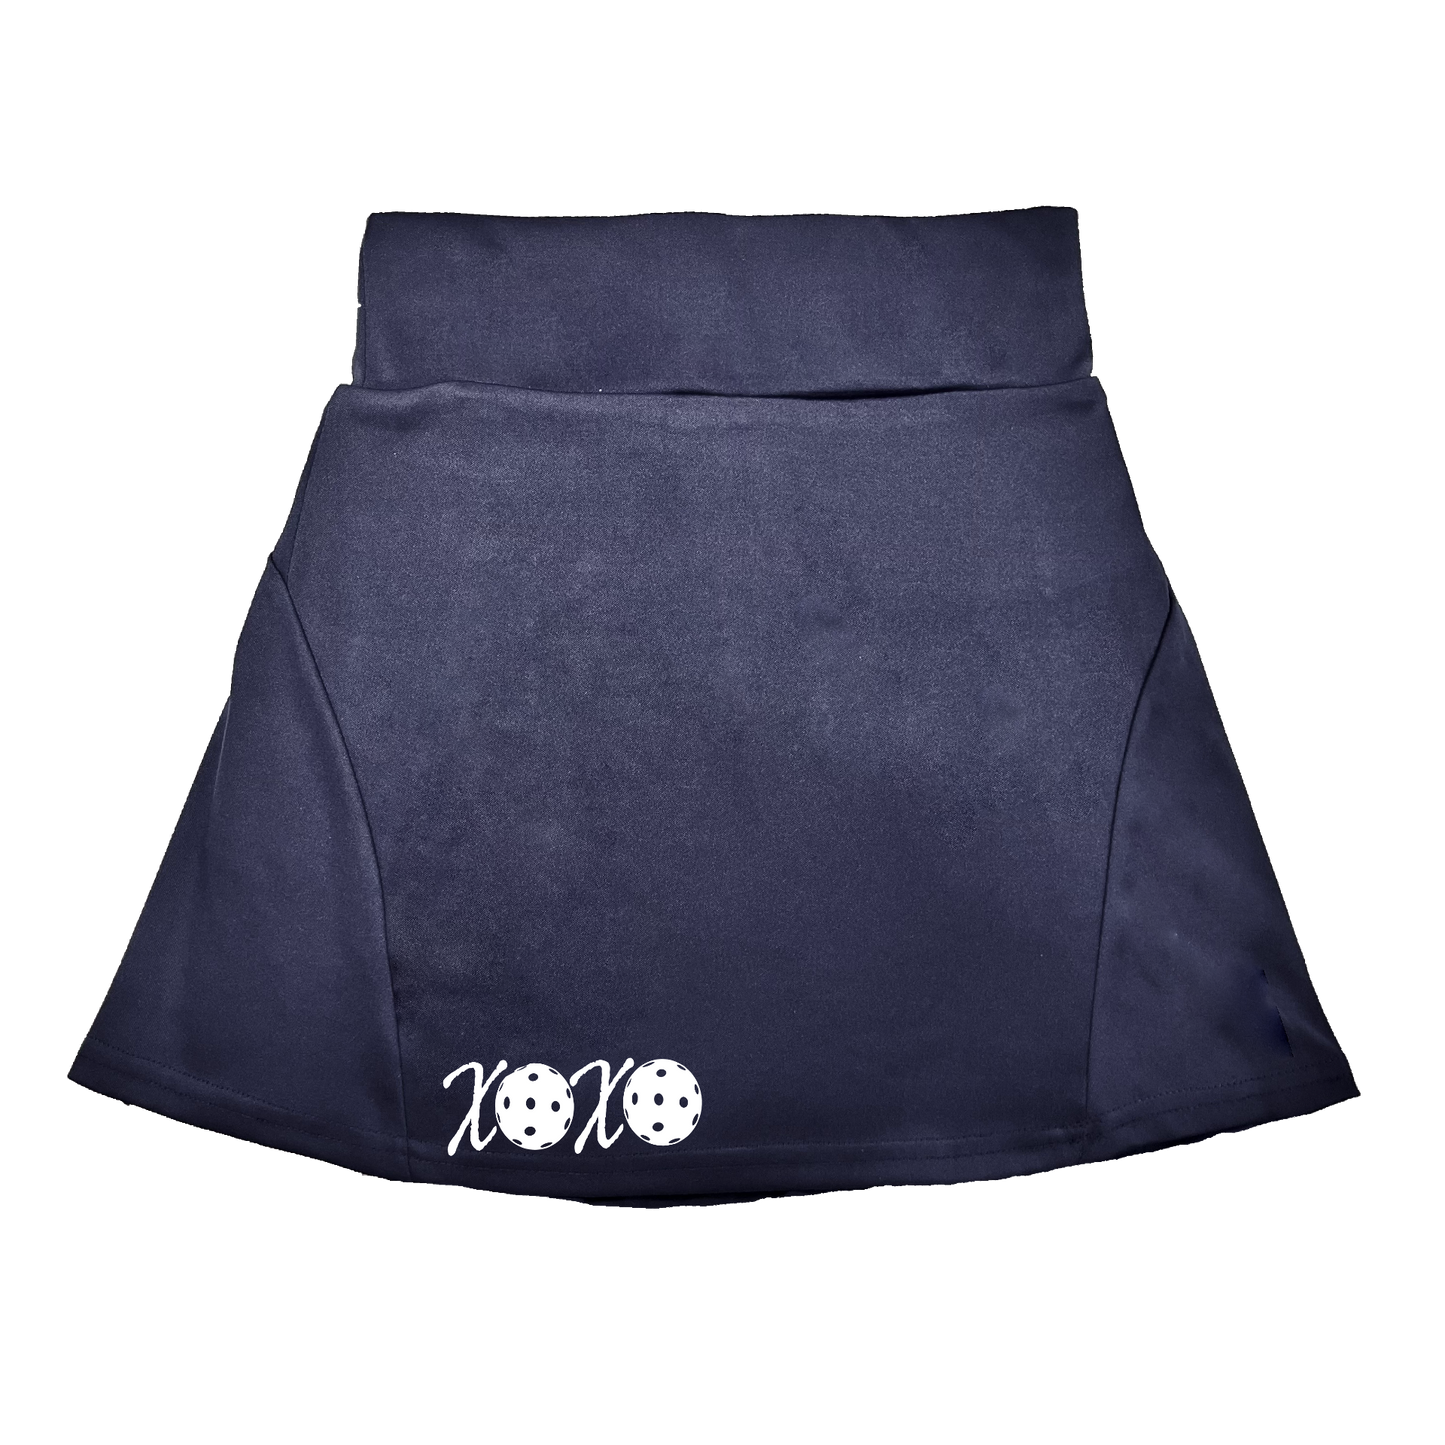 Pickleball Flirty Skort Design: XOXO  These flirty skorts have a flat mid-rise waistband with a 3 inch waistband.  Light weight without being see through and the material wicks away moisture quickly.  Flirty pleats in the back with inner shorts for free movement and stylish coverage on the courts.  A functional zipper pocket on the back and two built in pockets on the shorts for convenient stora